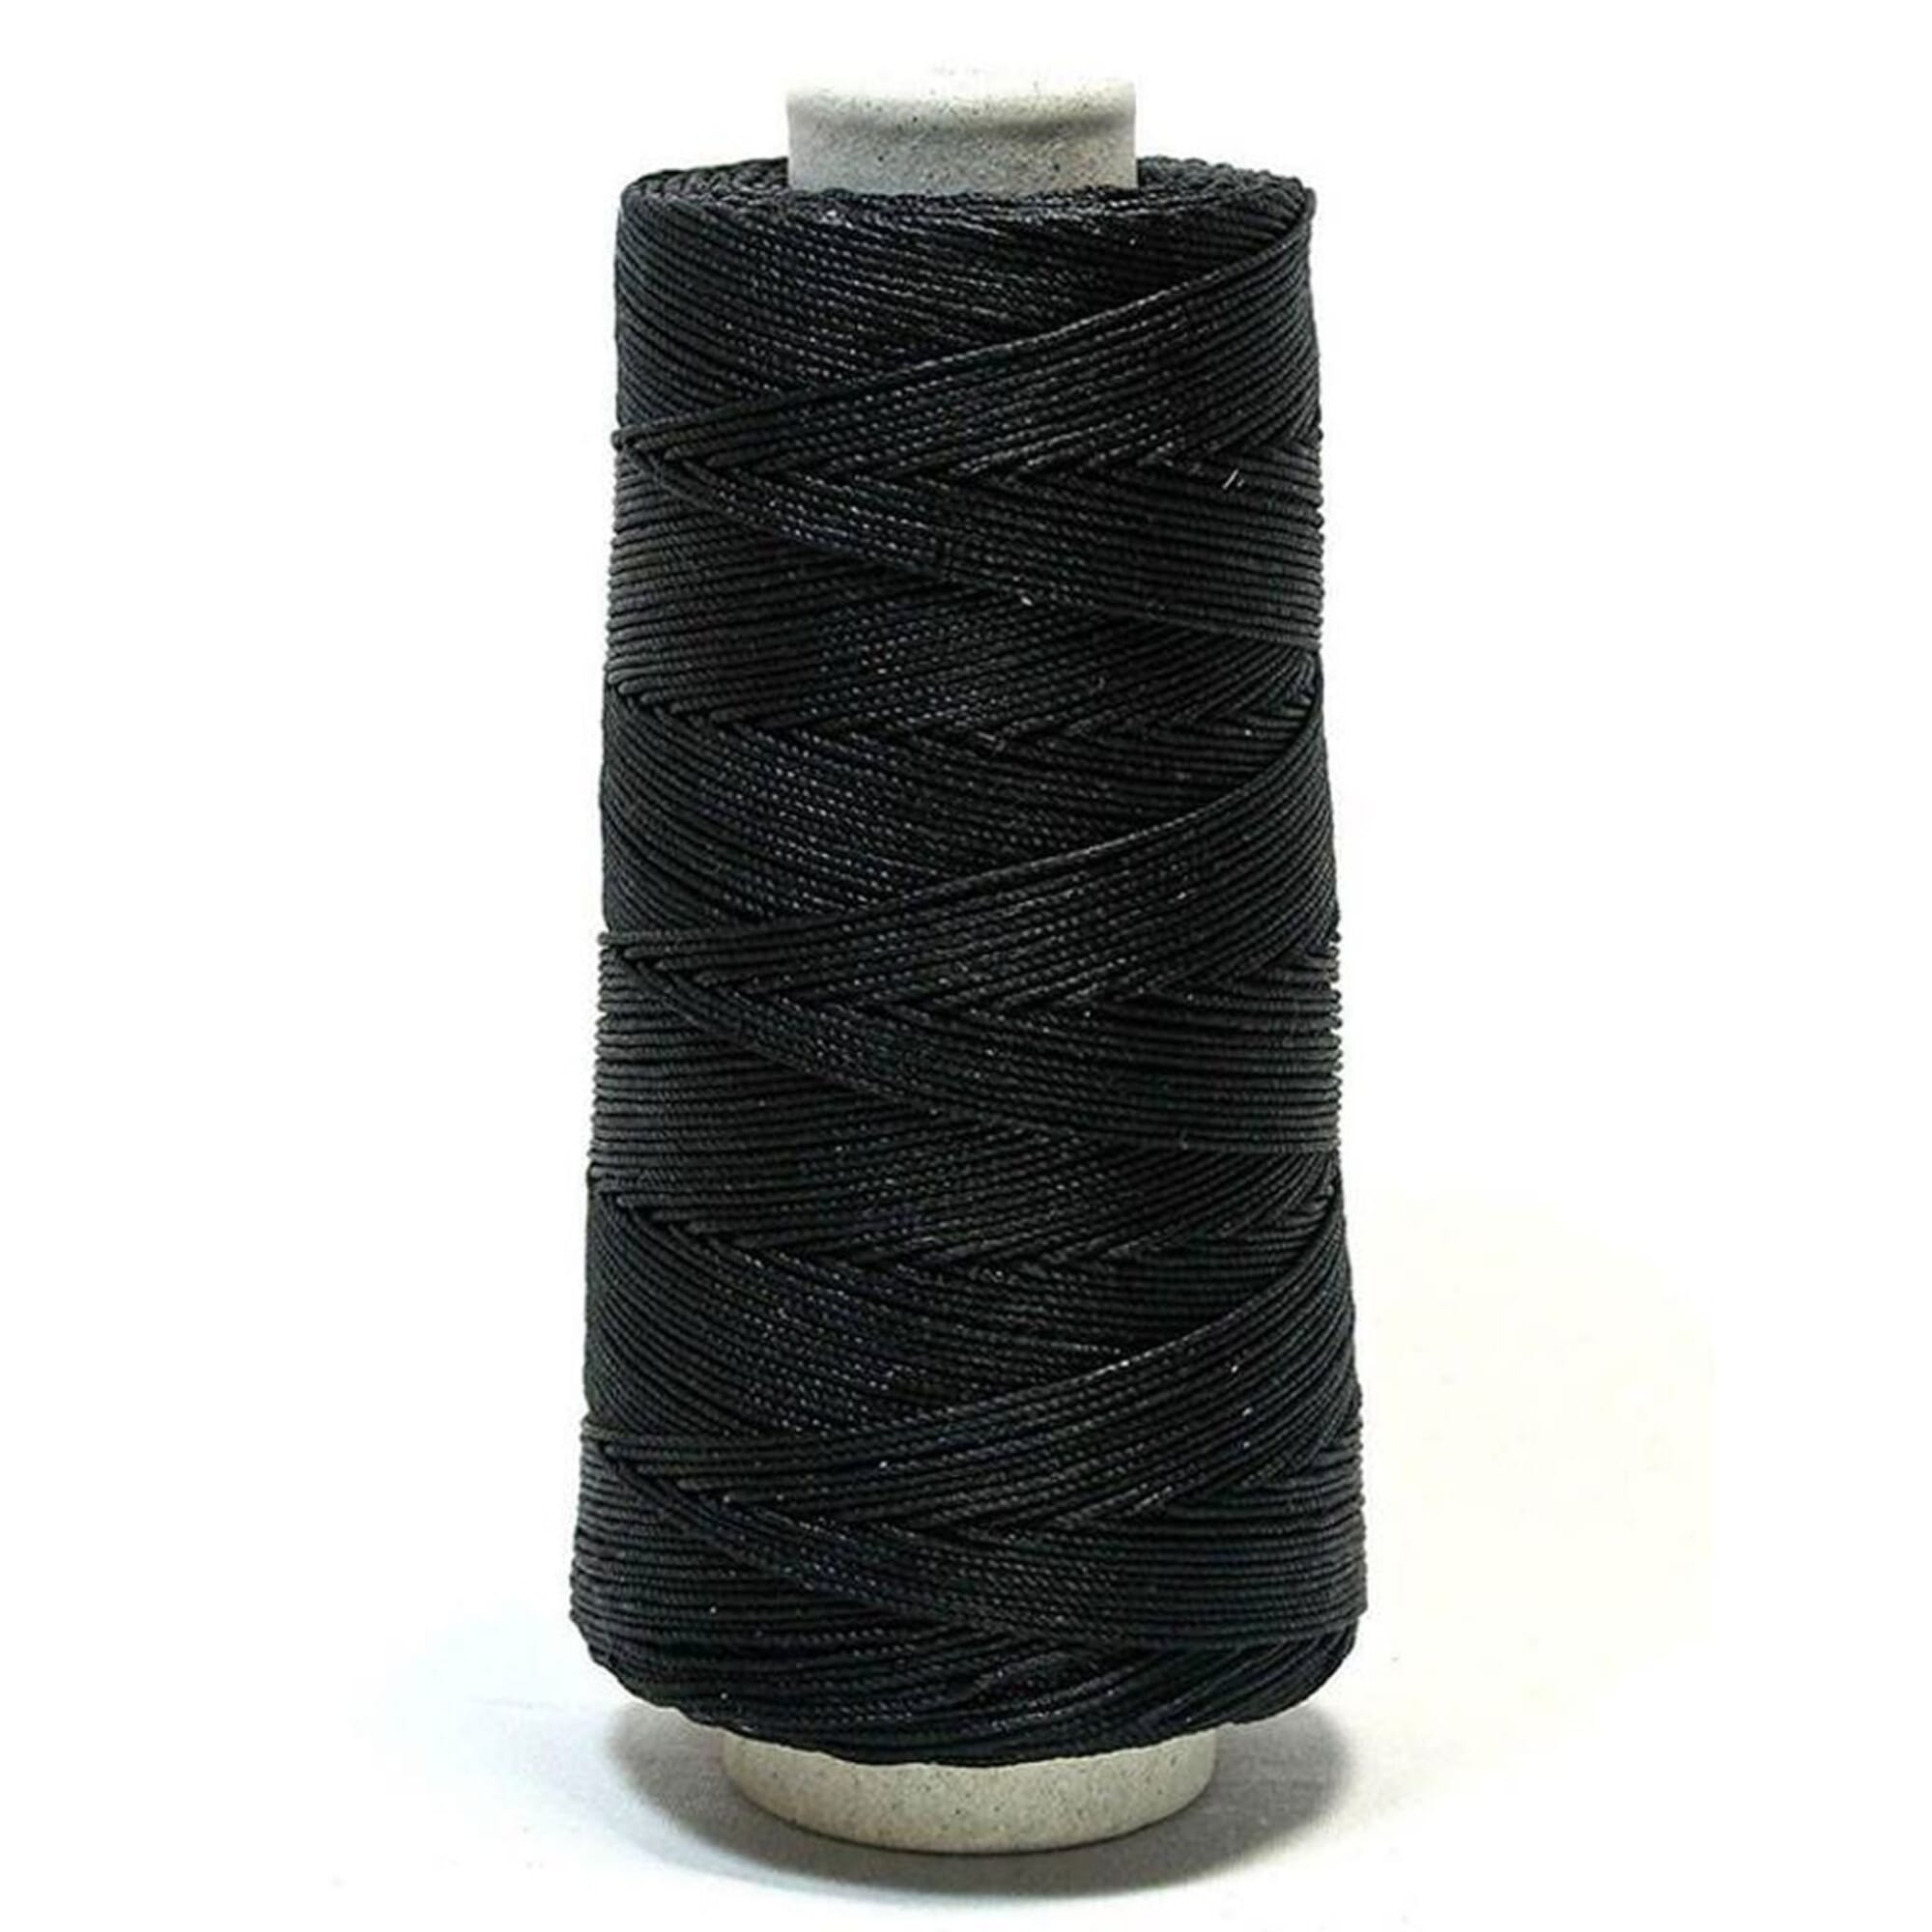 Waxed Linen Thread for Leatherworking  Waxed linen, Leather working,  Saddle stitching